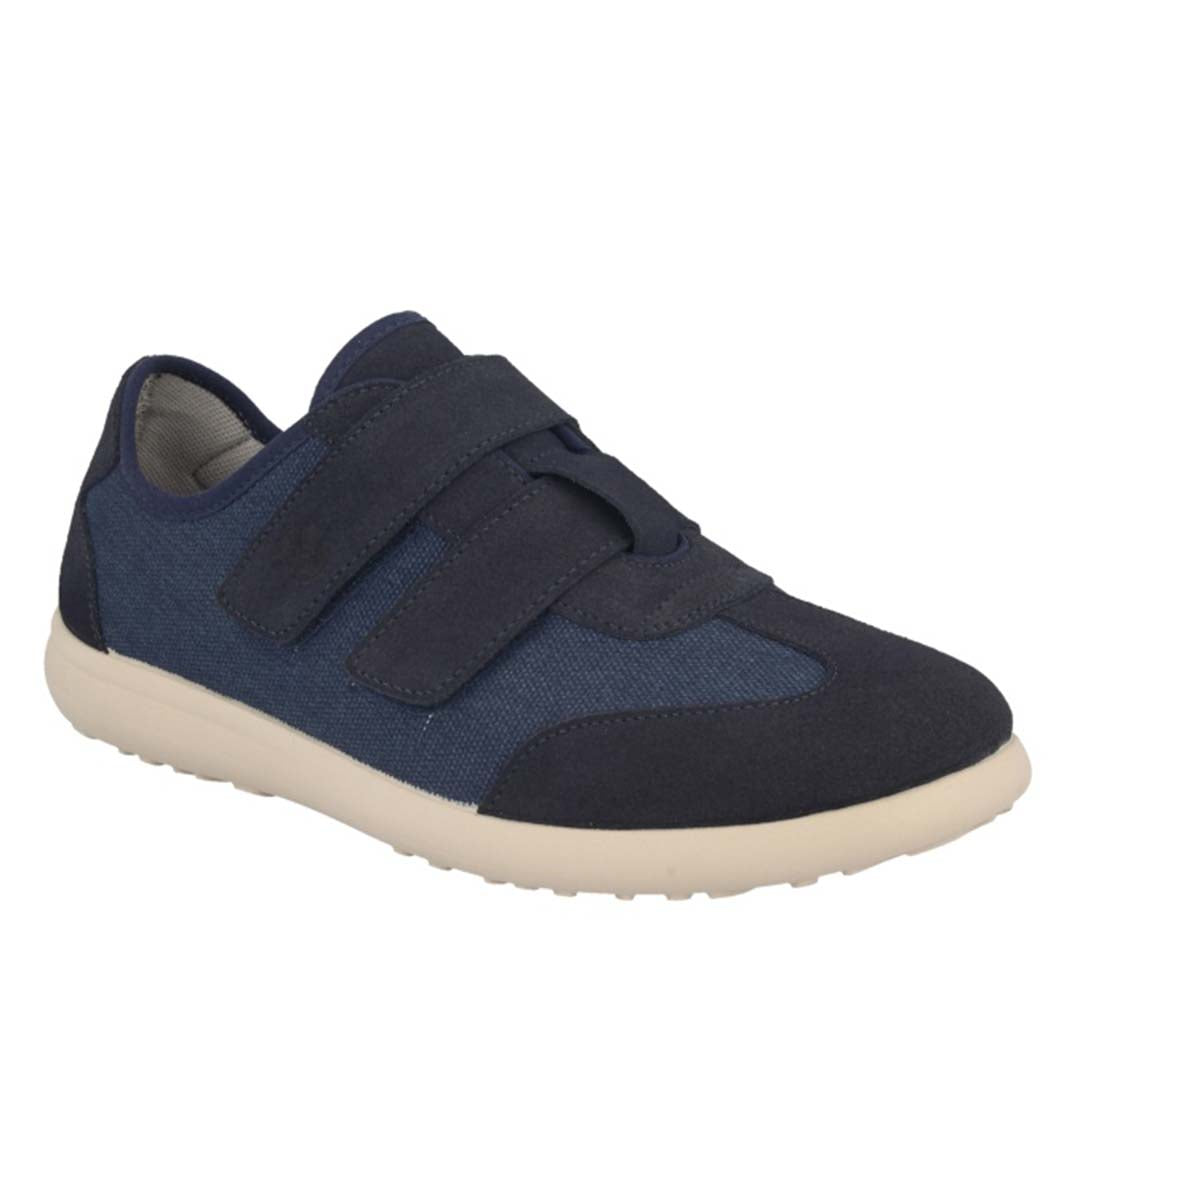 See the Blue Velcro Double Cloth Strap Sneakers Men Shoes in the colour BLUE, available in various sizes